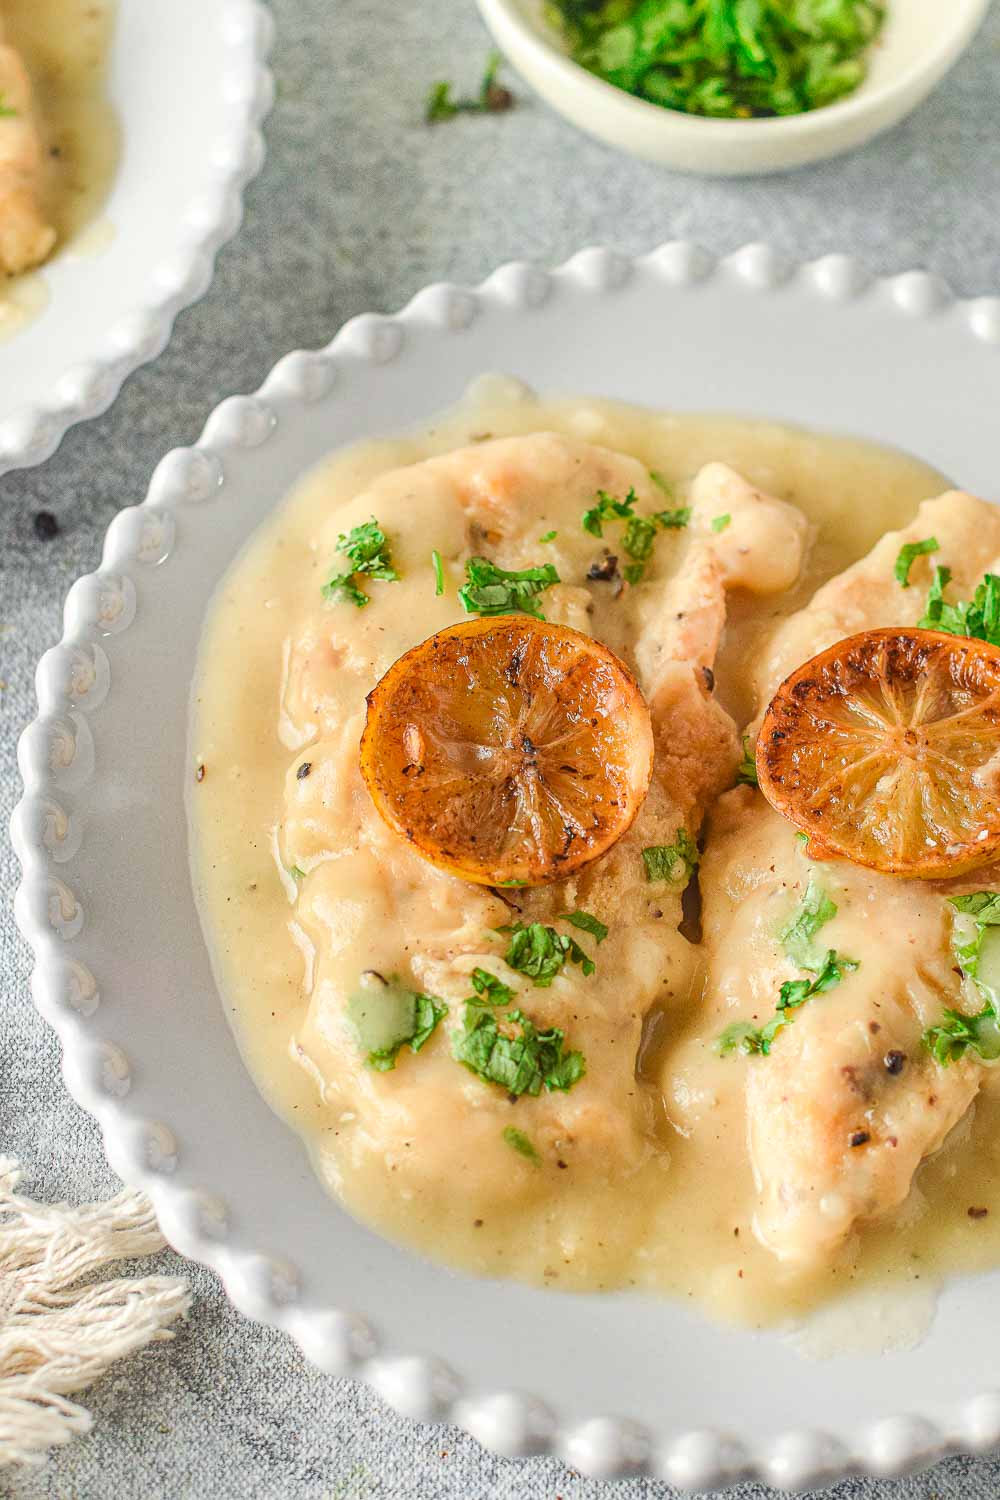 This super-easy 30-minute chicken Francaise recipe has just the right amount of lemon flavor, white wine, and butter. Add it to your dinner rotation!